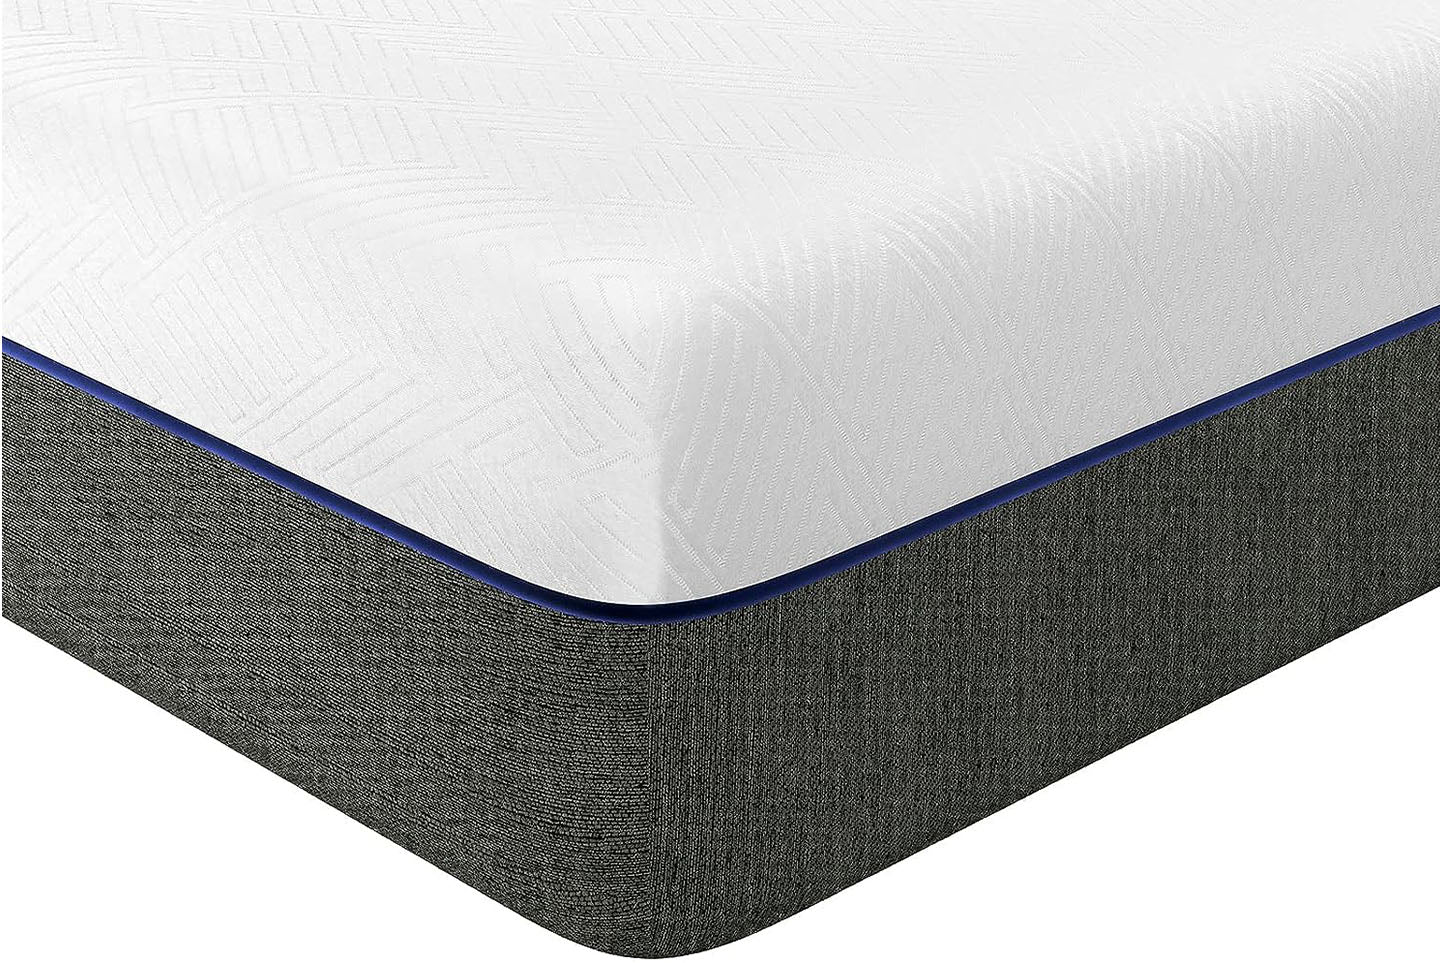 Memory Foam Mattress, Soft Fabric, Skin-friendly Mattress, Breathable Cover, 2 Layer for More Supportive 4FT Small (120x190x20cm)